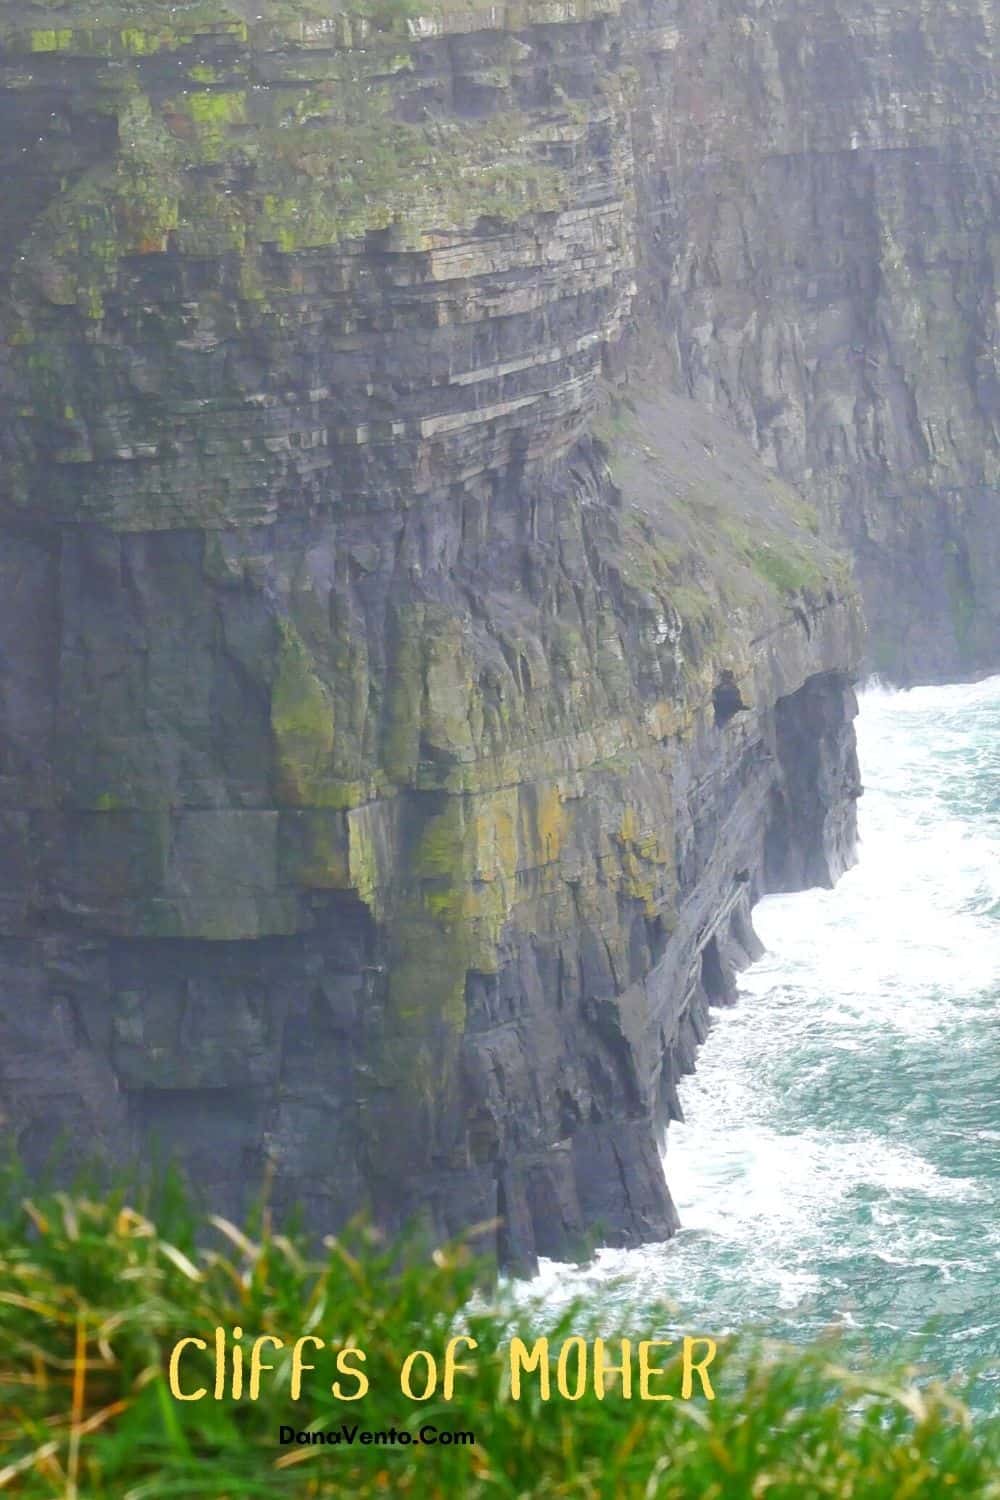 waves crashing Sea Cliffs in Ireland Will Fascinate and Steal Your Full Attention 